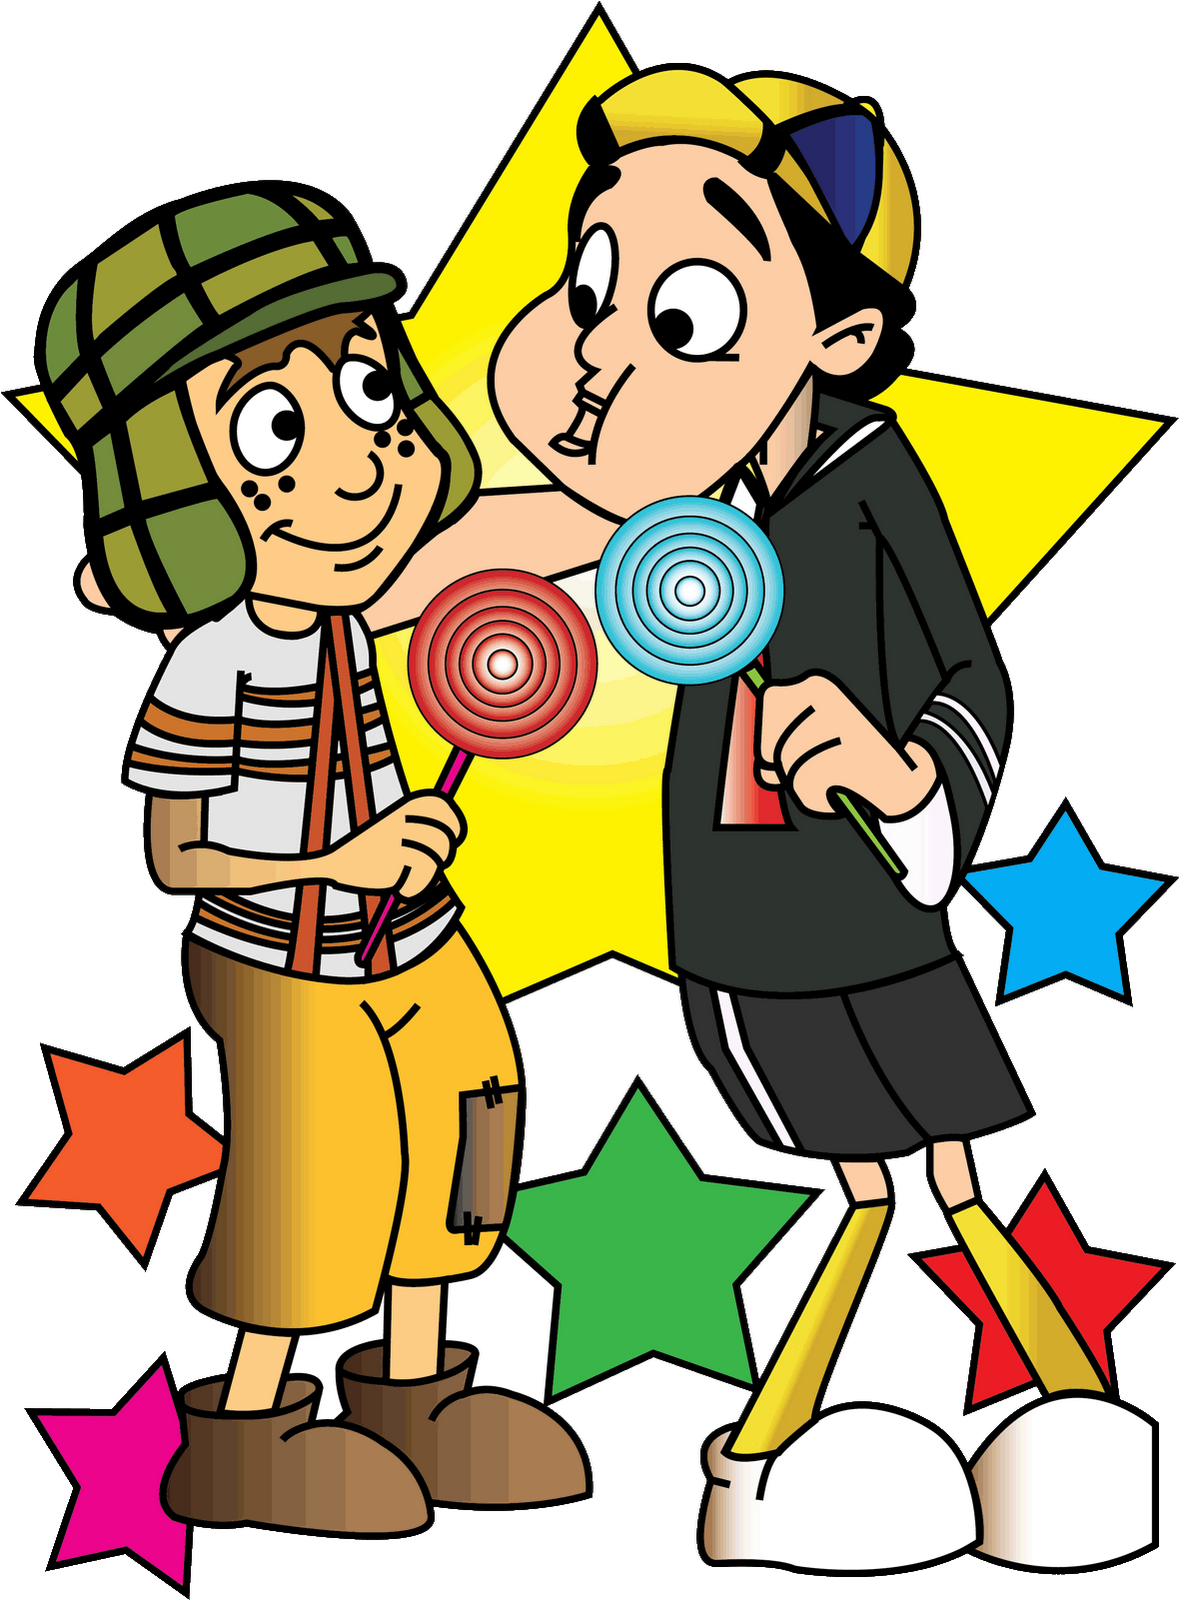 Download and share clipart about El Chavo Animado Personajes Chavo Del 8 An...